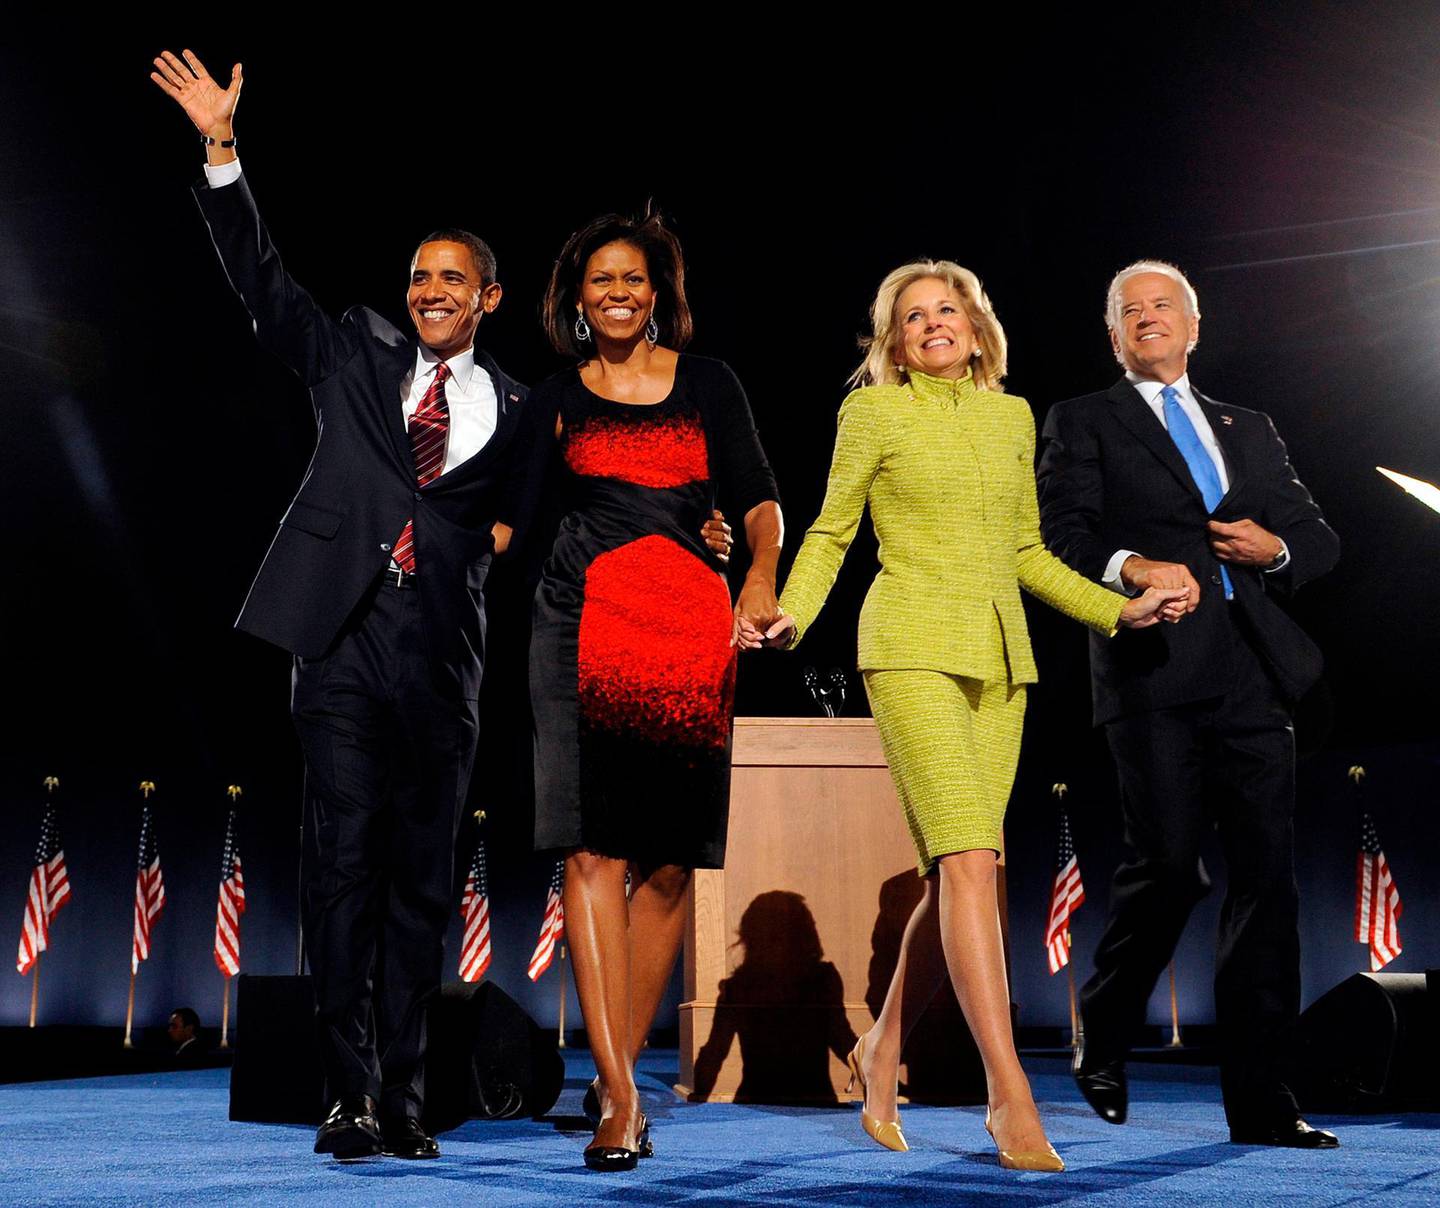 (FILES) In this file photo taken on November 04, 2008, US President-elect Barack Obama (L), his wife Michelle (2ndL), vice president-elect Joe Biden (R) and his wife Jill arrive for an election night party in Chicago, Illinois. Jill Biden is no stranger to the glare of the political spotlight. Her husband has been a Washington insider since they wed in 1977, and she was America's second lady for eight years. But if Joe Biden wins the White House, his 69-year-old wife will have the opportunity to push the role of first lady into the 21st century -- by keeping her full-time job as a professor. "Most American women have both a work life and a family life, but first ladies have never been allowed to do so," said Katherine Jellison, a history professor at Ohio University. / AFP / Emmanuel DUNAND
